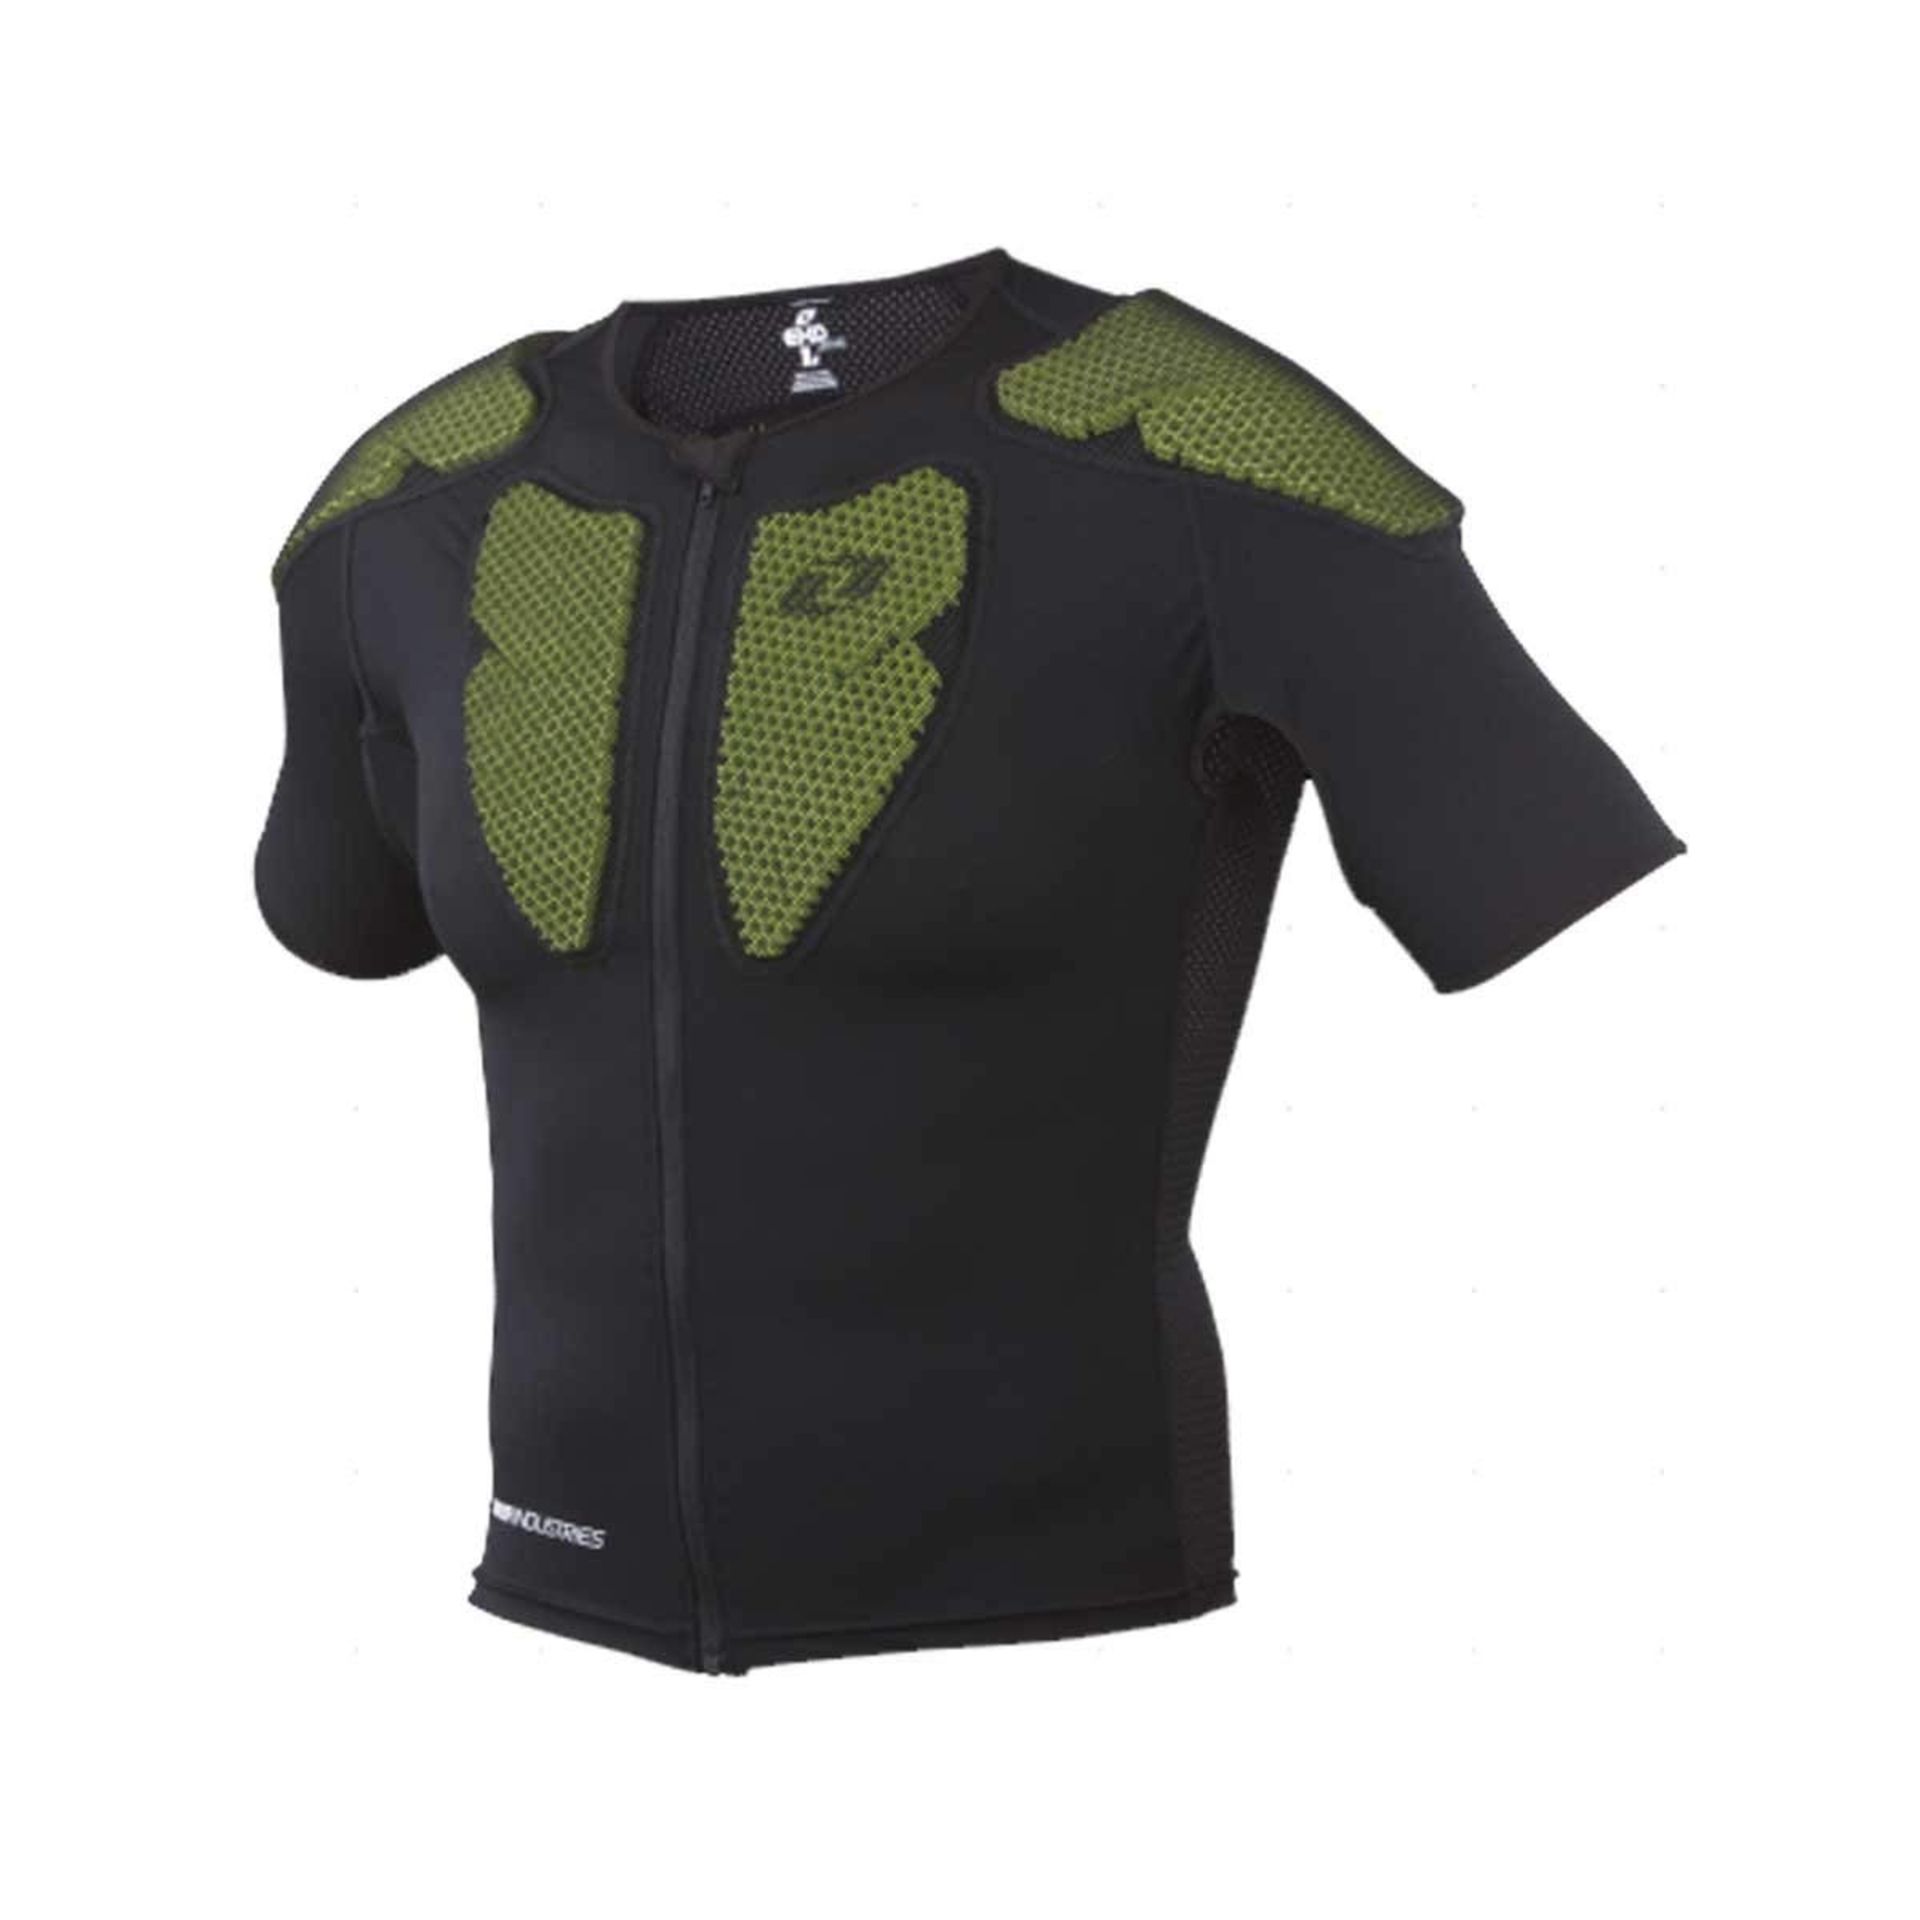 2 x Pieces of One Industries Cycling Clothing | Total RRP £90.00 | See Description for Details